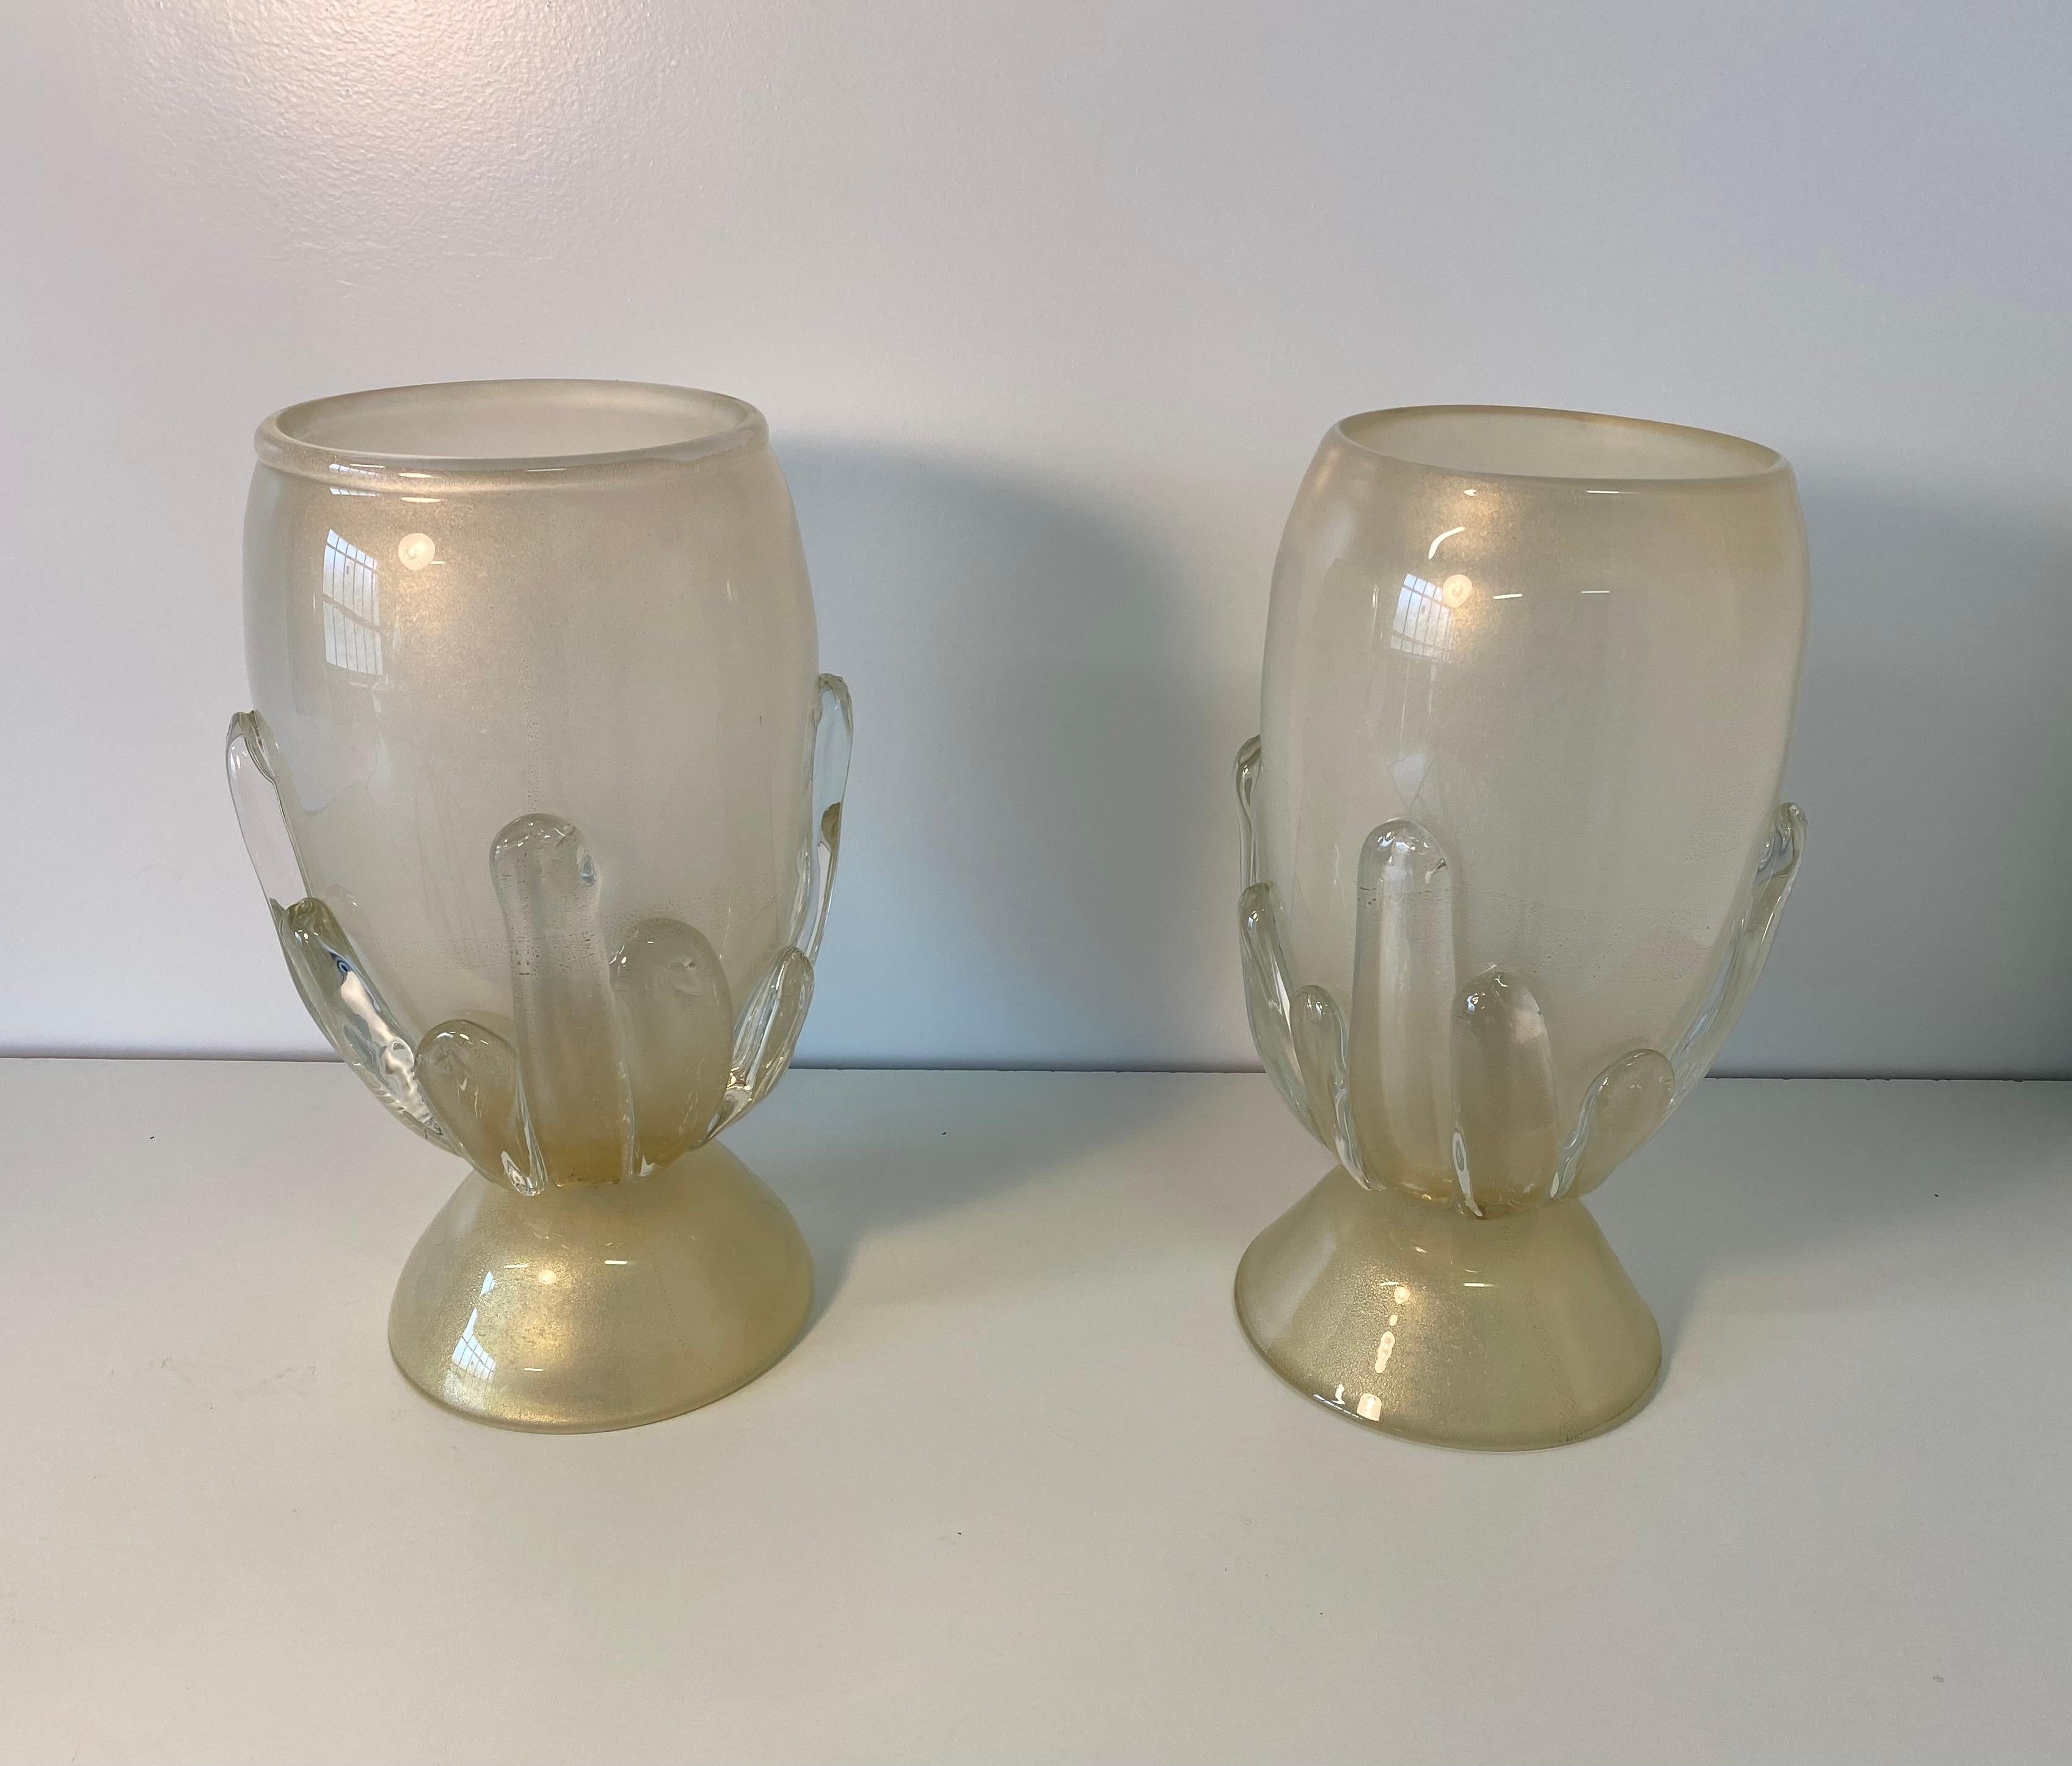 Contemporary Pair of Large Murano Glass Table Lamps, Italy